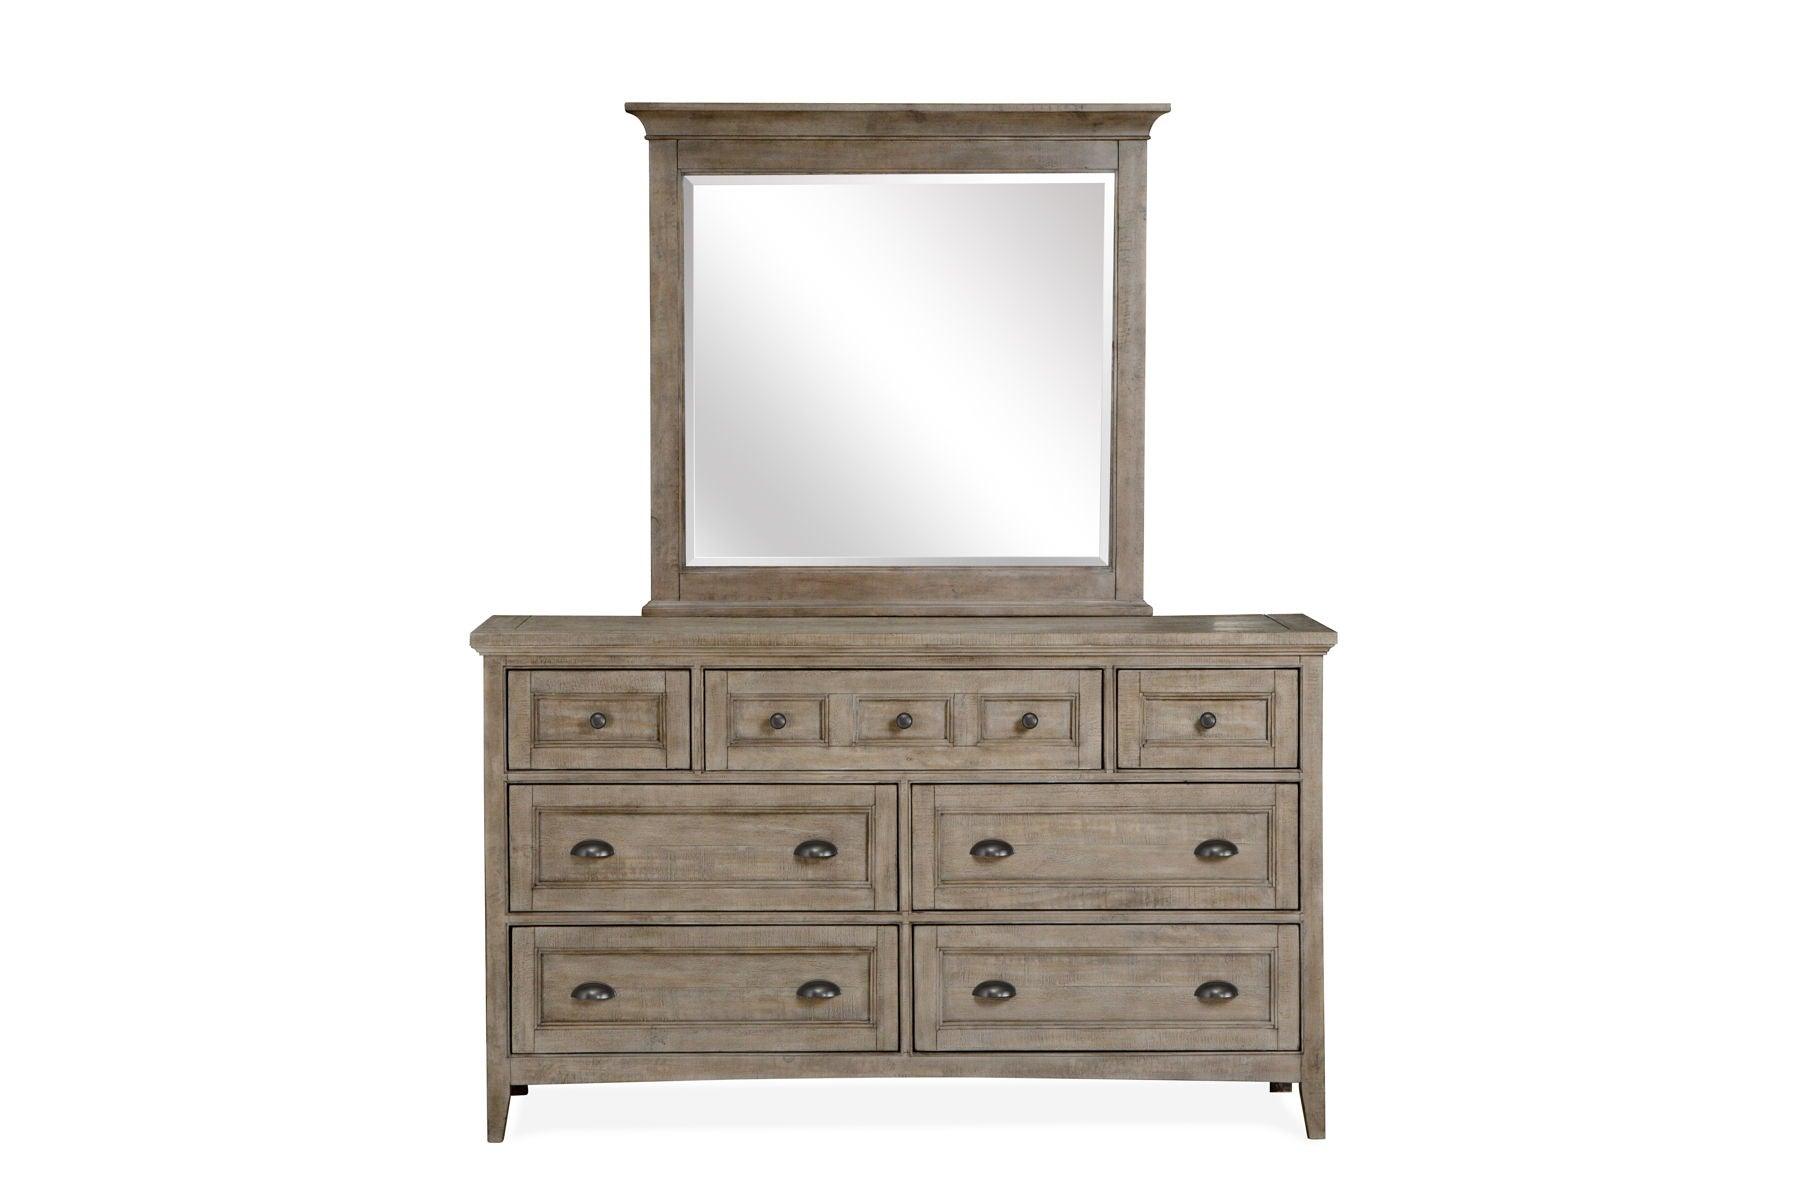 Magnussen Furniture - Paxton Place - Wood Drawer Dresser - Dove Tail Grey - 5th Avenue Furniture